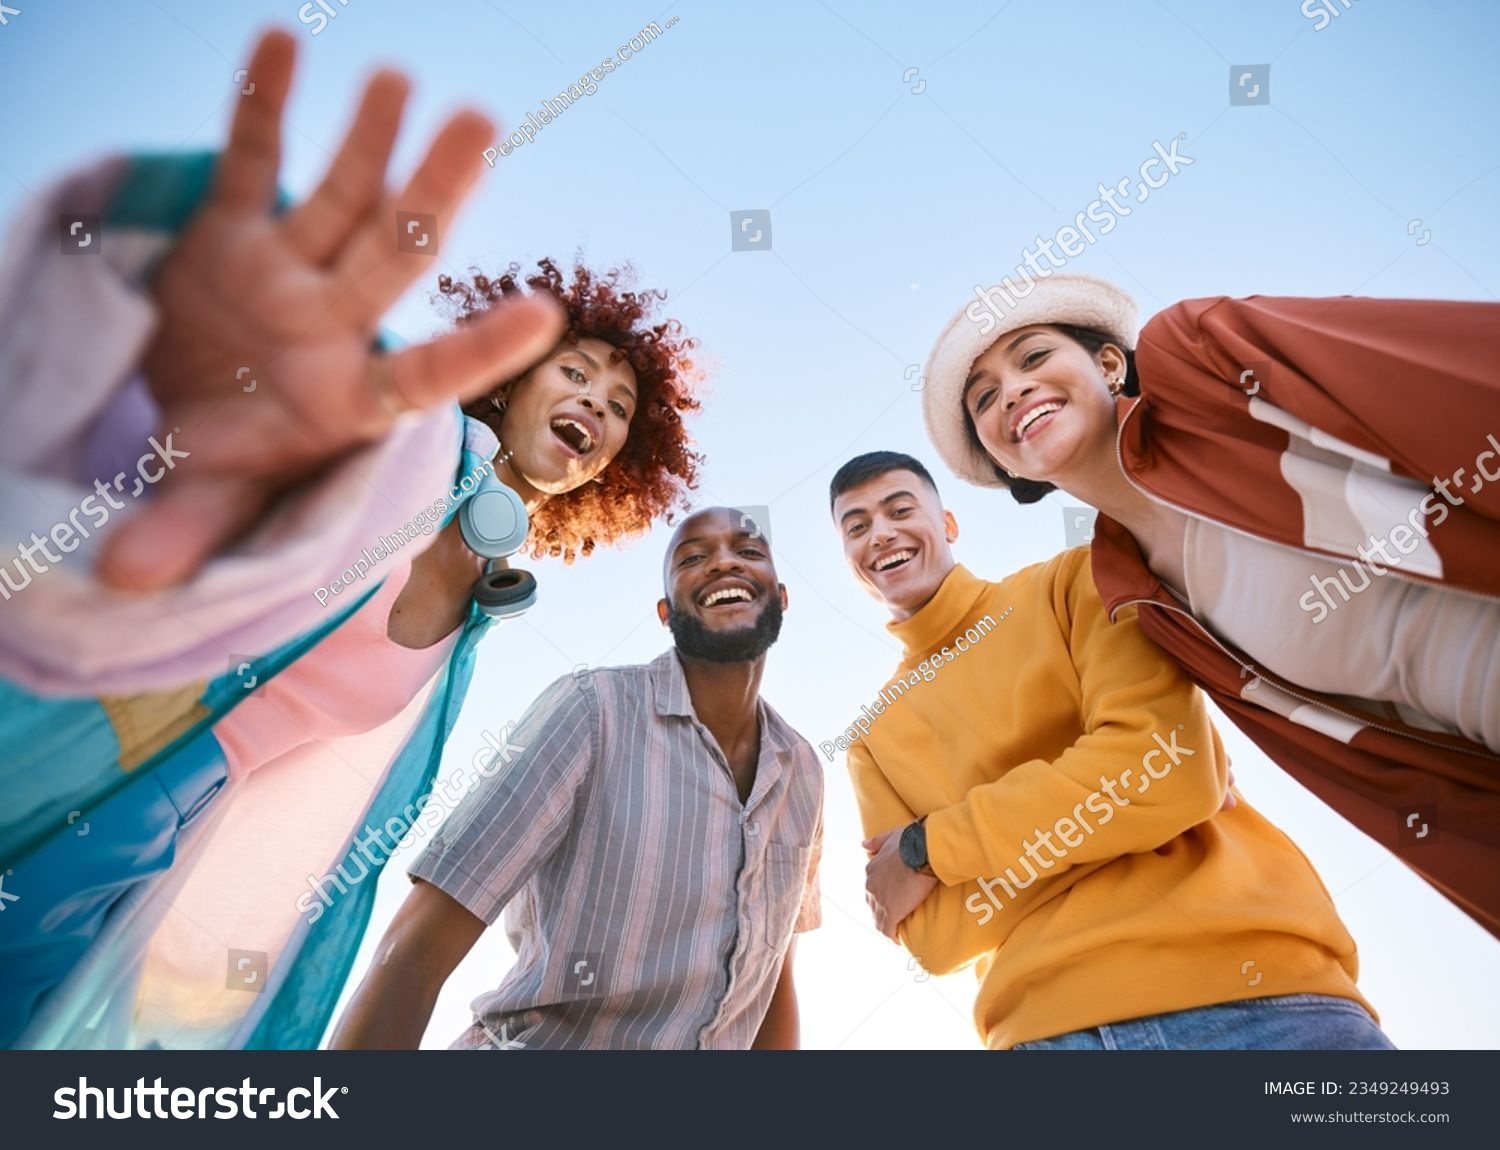 Portrait, smile and a group of friends on a blue sky outdoor together for freedom, bonding or fun from below. Diversity, travel or summer with happy men and women laughing outside on vacation #2349249493